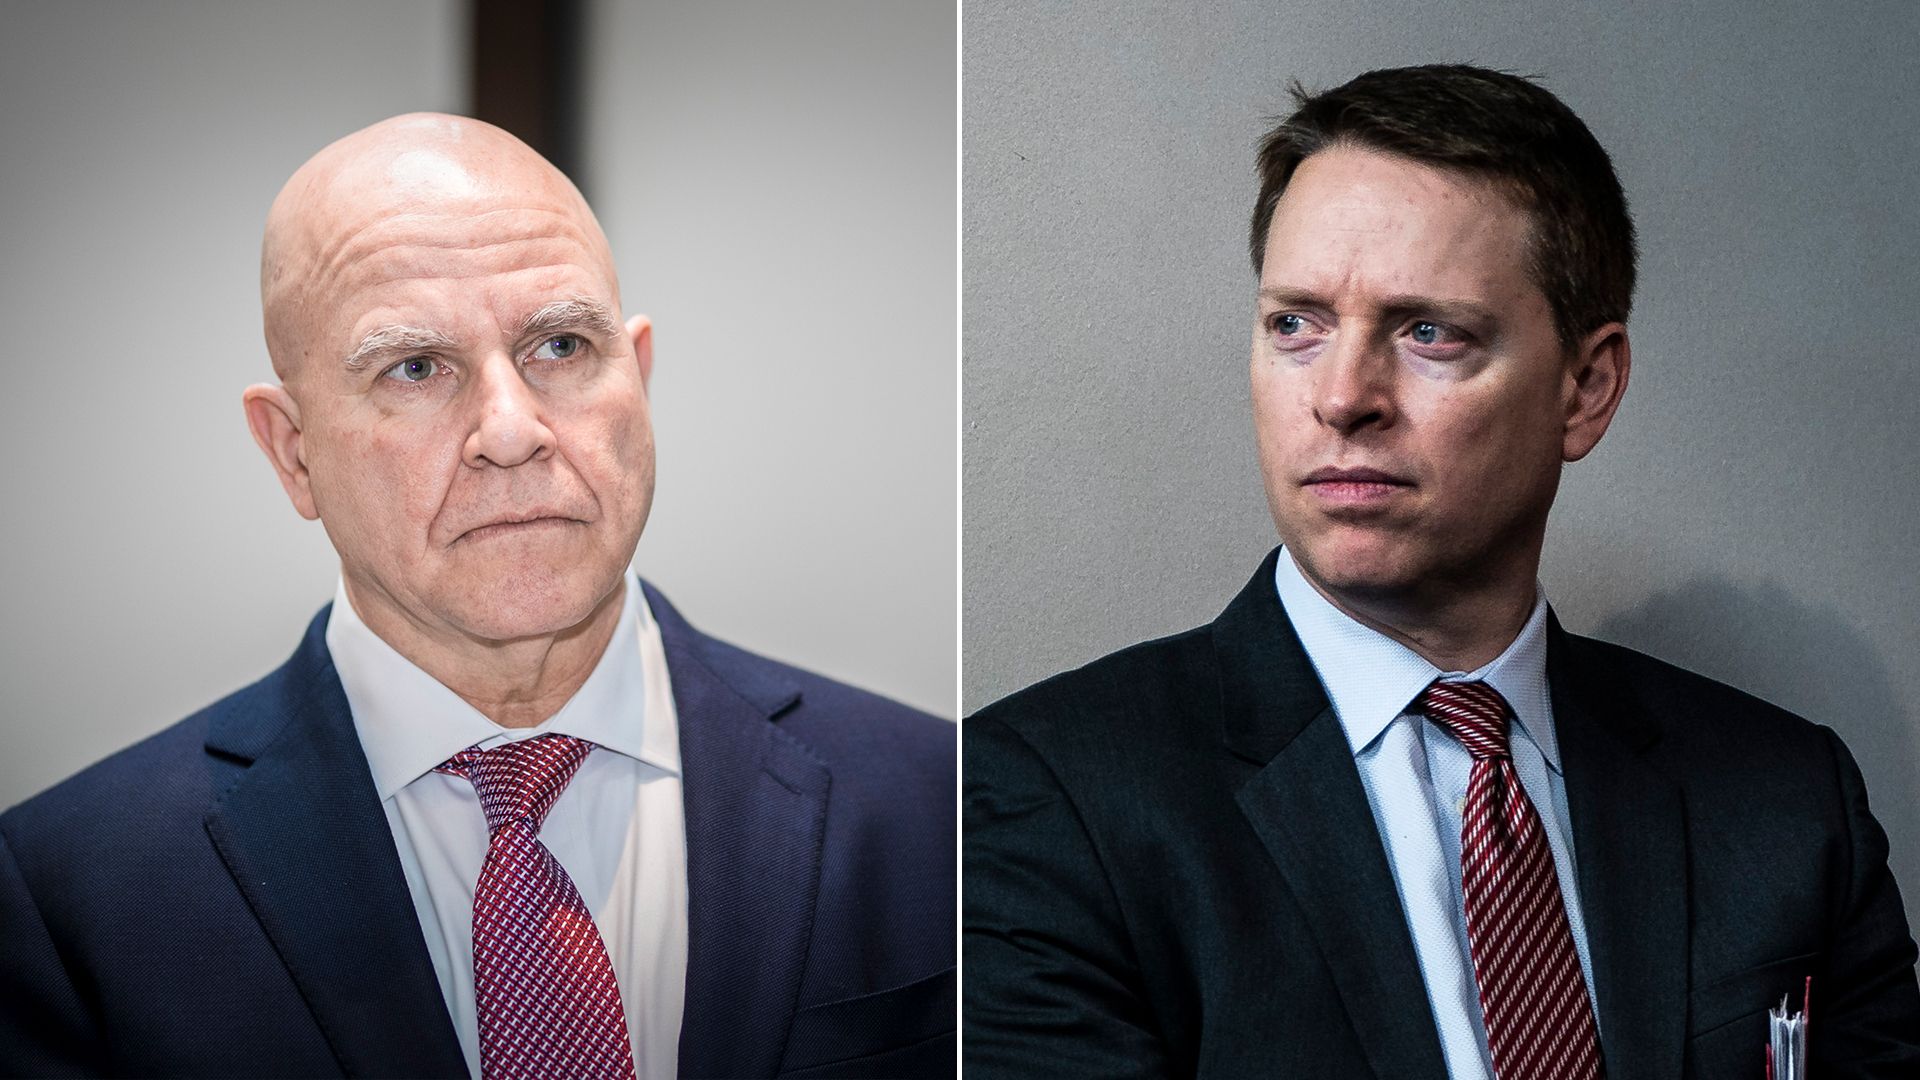 H.R. McMaster and Matthew Pottinger are seen in a side-by-side photo array